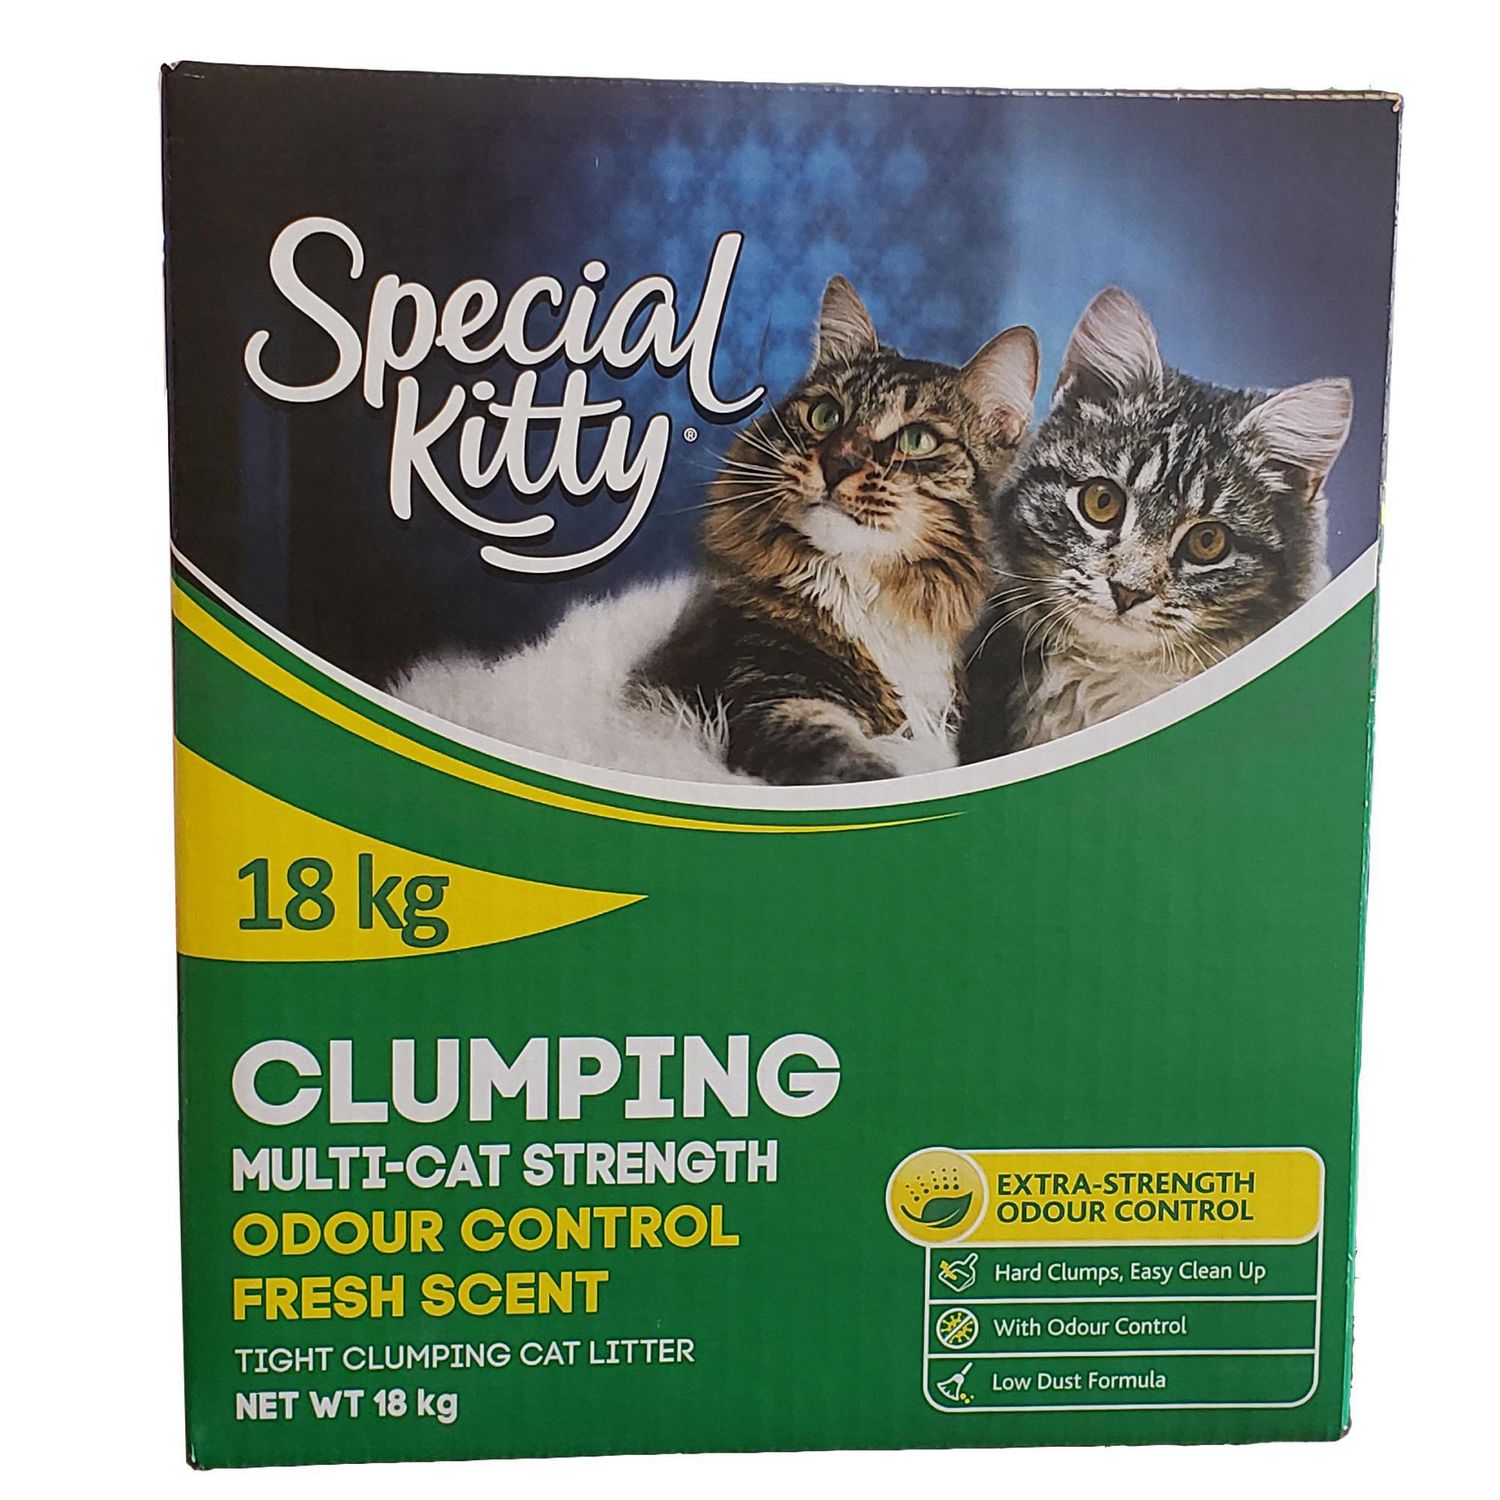 Special Kitty® Clumping MultiCat Strength 18 kg Walmart Canada